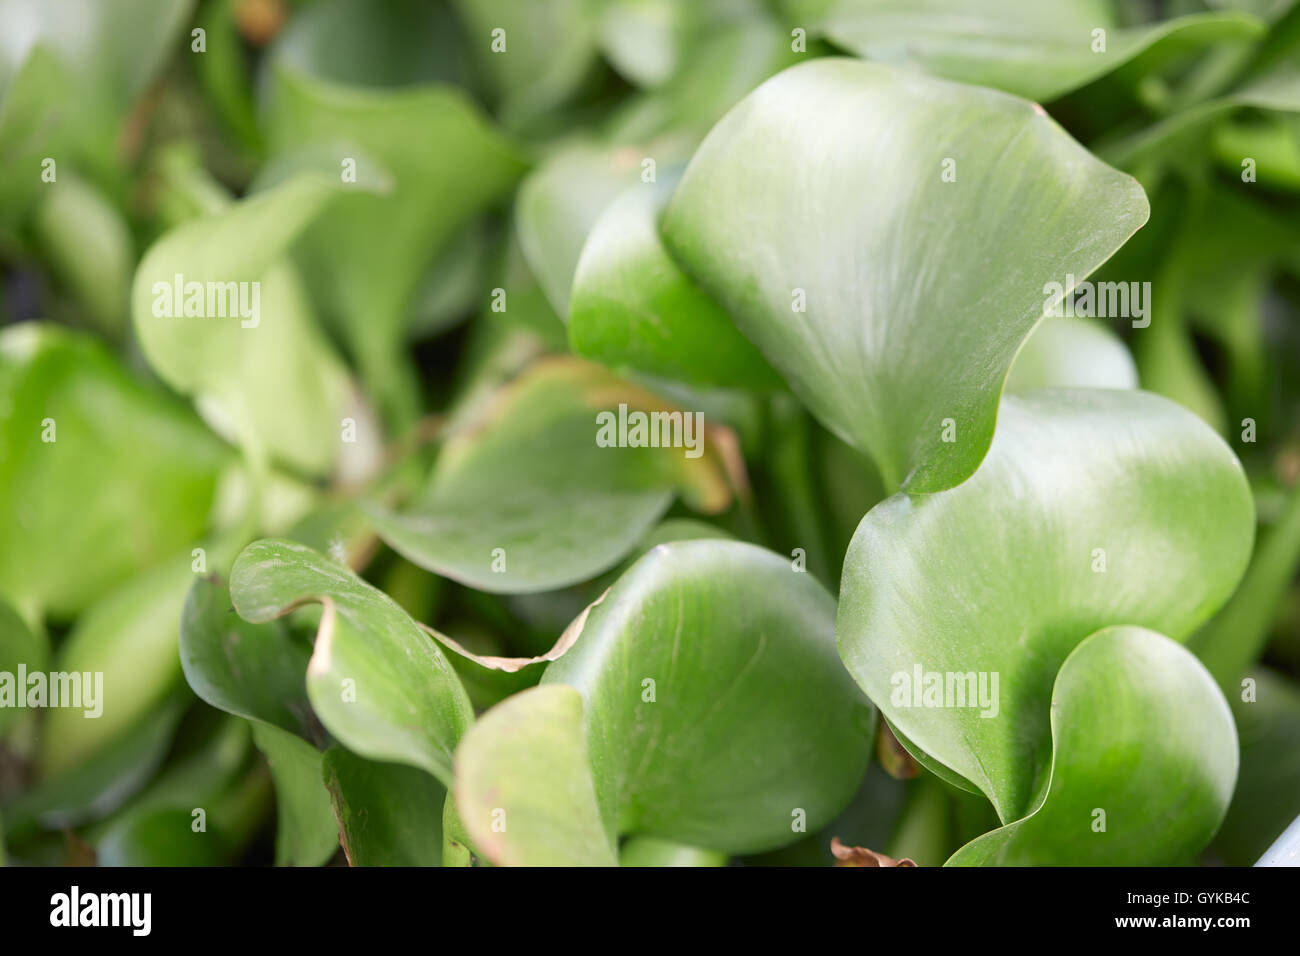 Eichornia crassipes, water hyacinth green leaves background Stock Photo